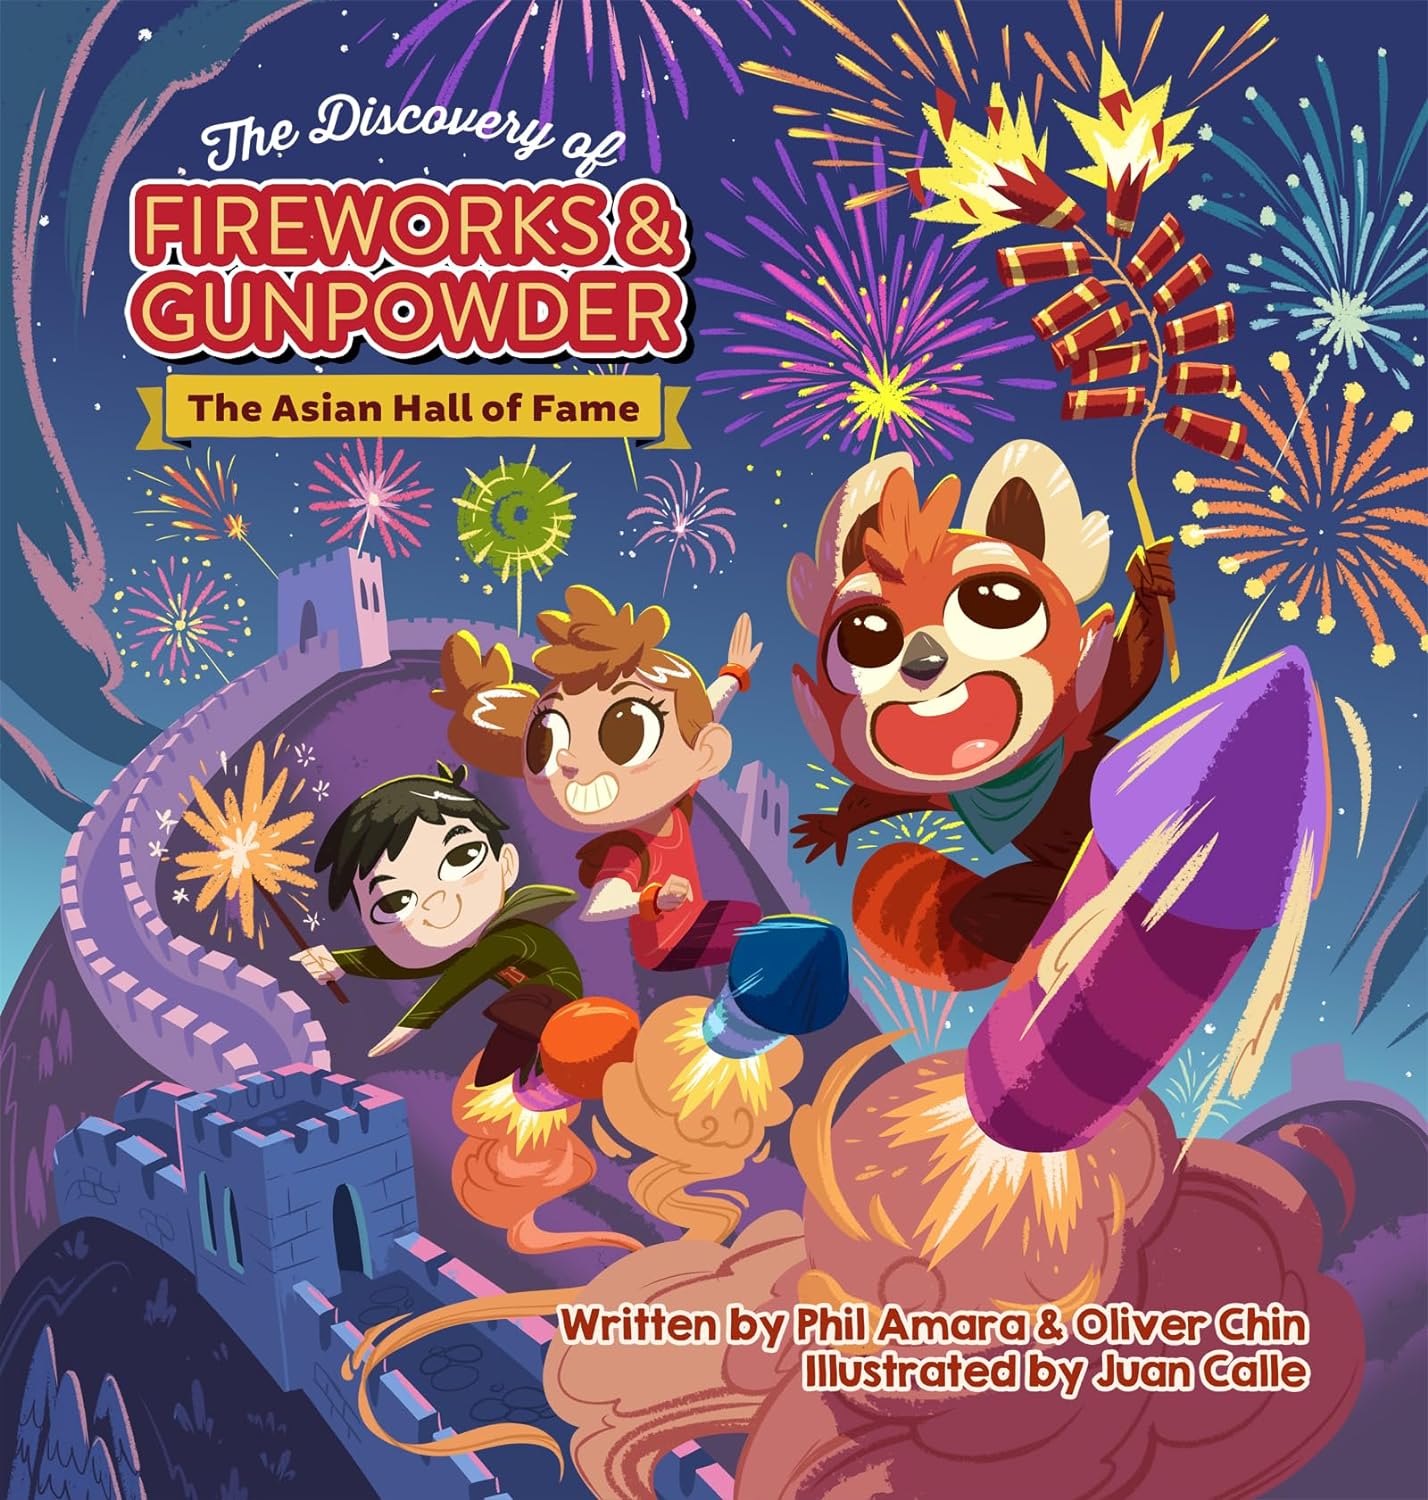 The Discovery of Fireworks and Gunpowder: The Asian Hall of Fame